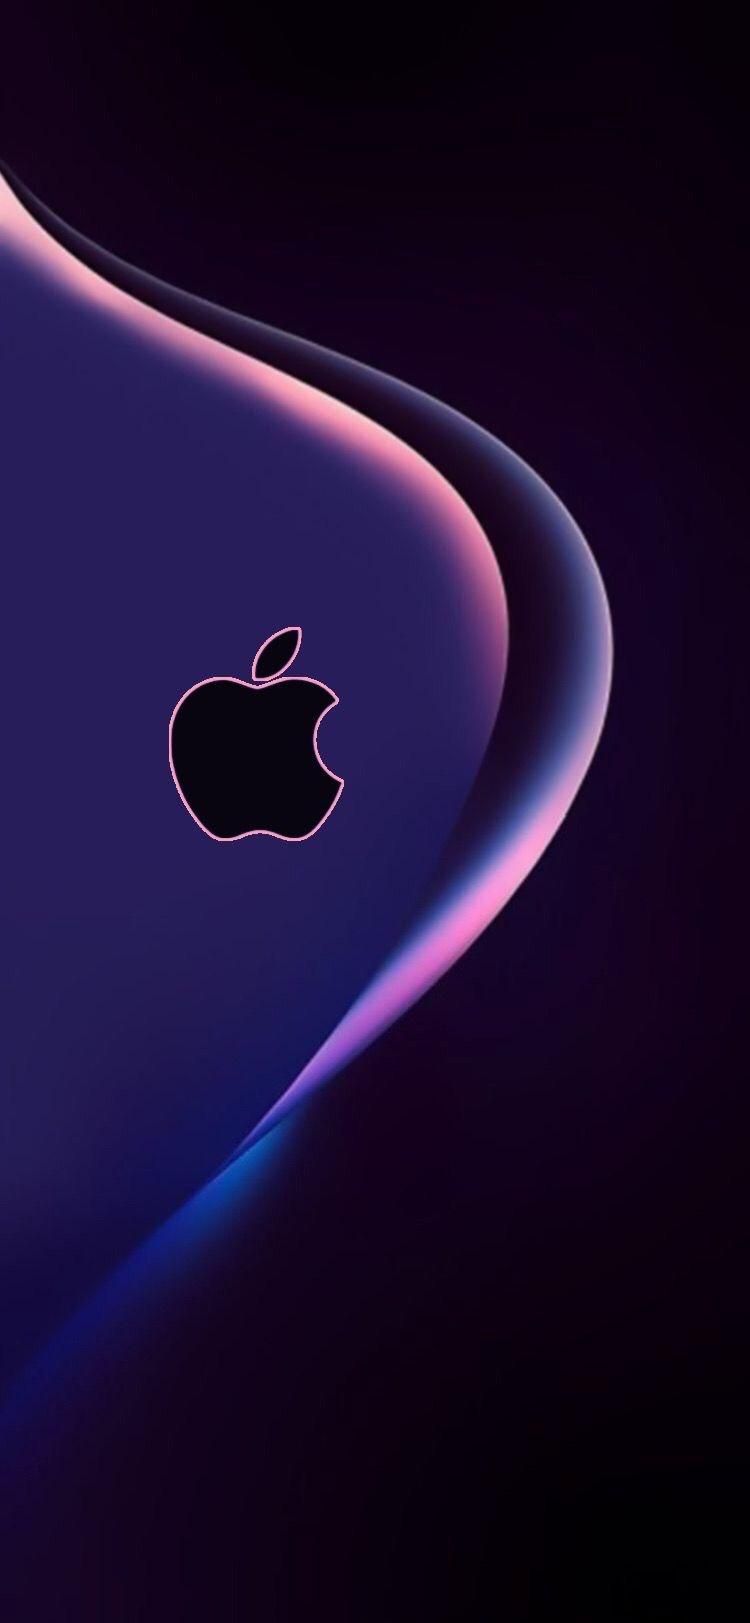 perfect for amoled screens. Apple wallpaper iphone, Apple iphone wallpaper hd, Apple logo wallpaper iphone